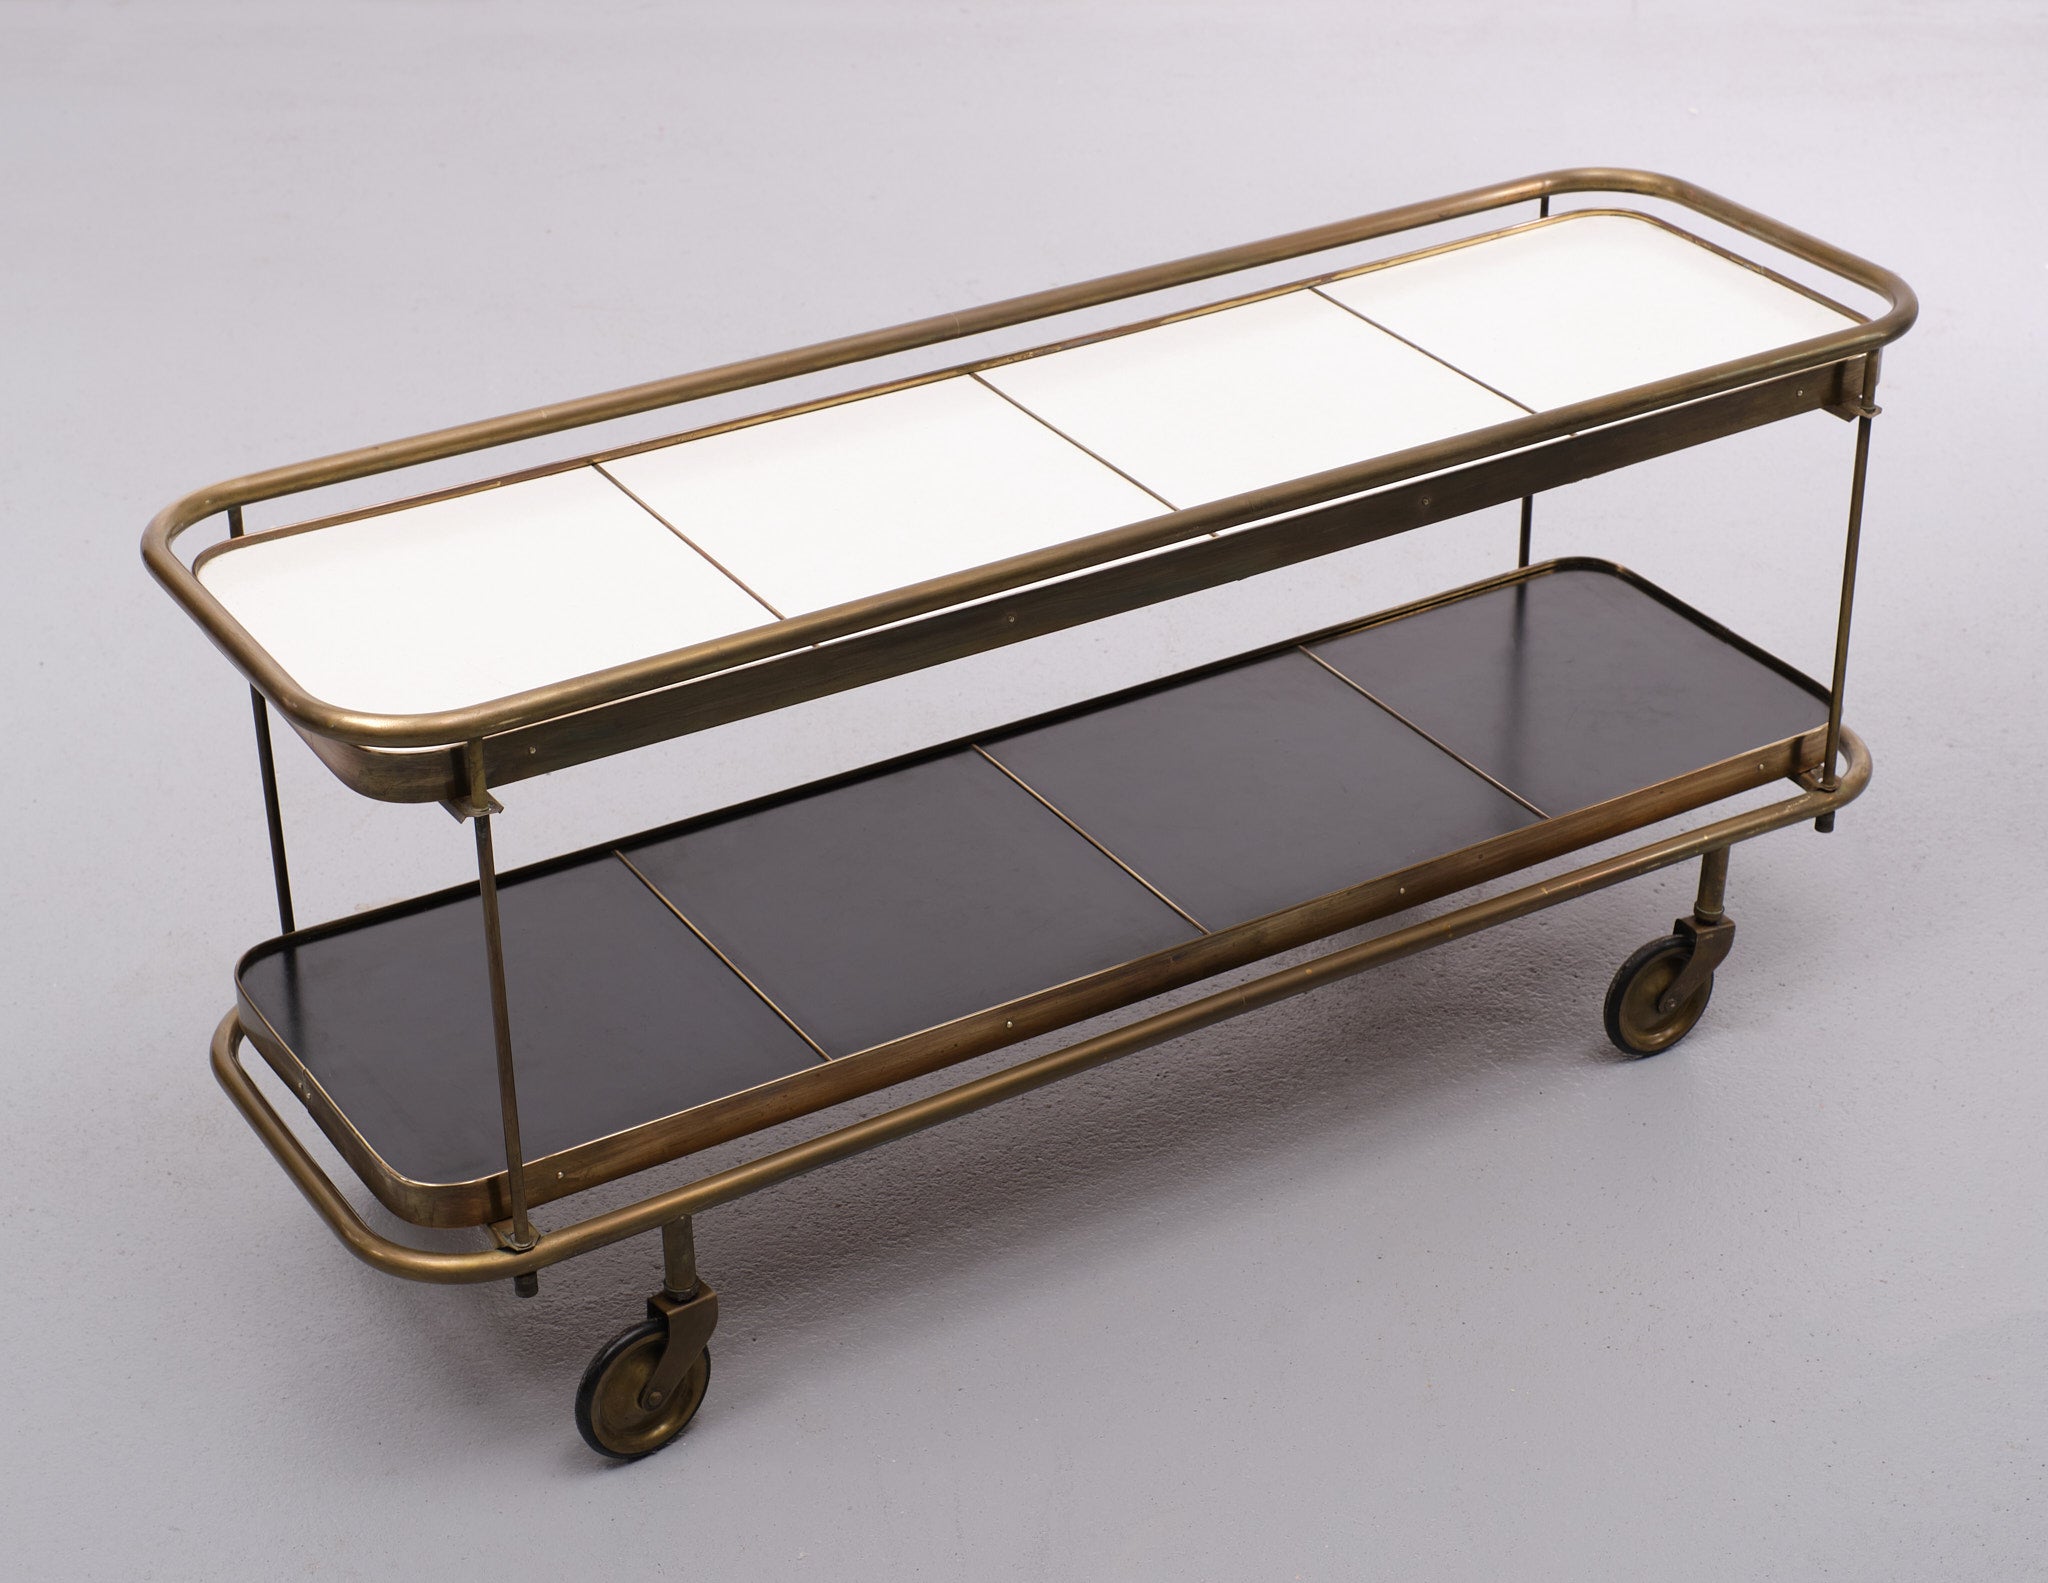 Superb Low Brass Trolly, on wheels, comes with Two Laminated trays one in Black and One in White, Still in very good condition.
Brass details and rim. Matthieu Mategot. in style France 1950s. Unique piece 

